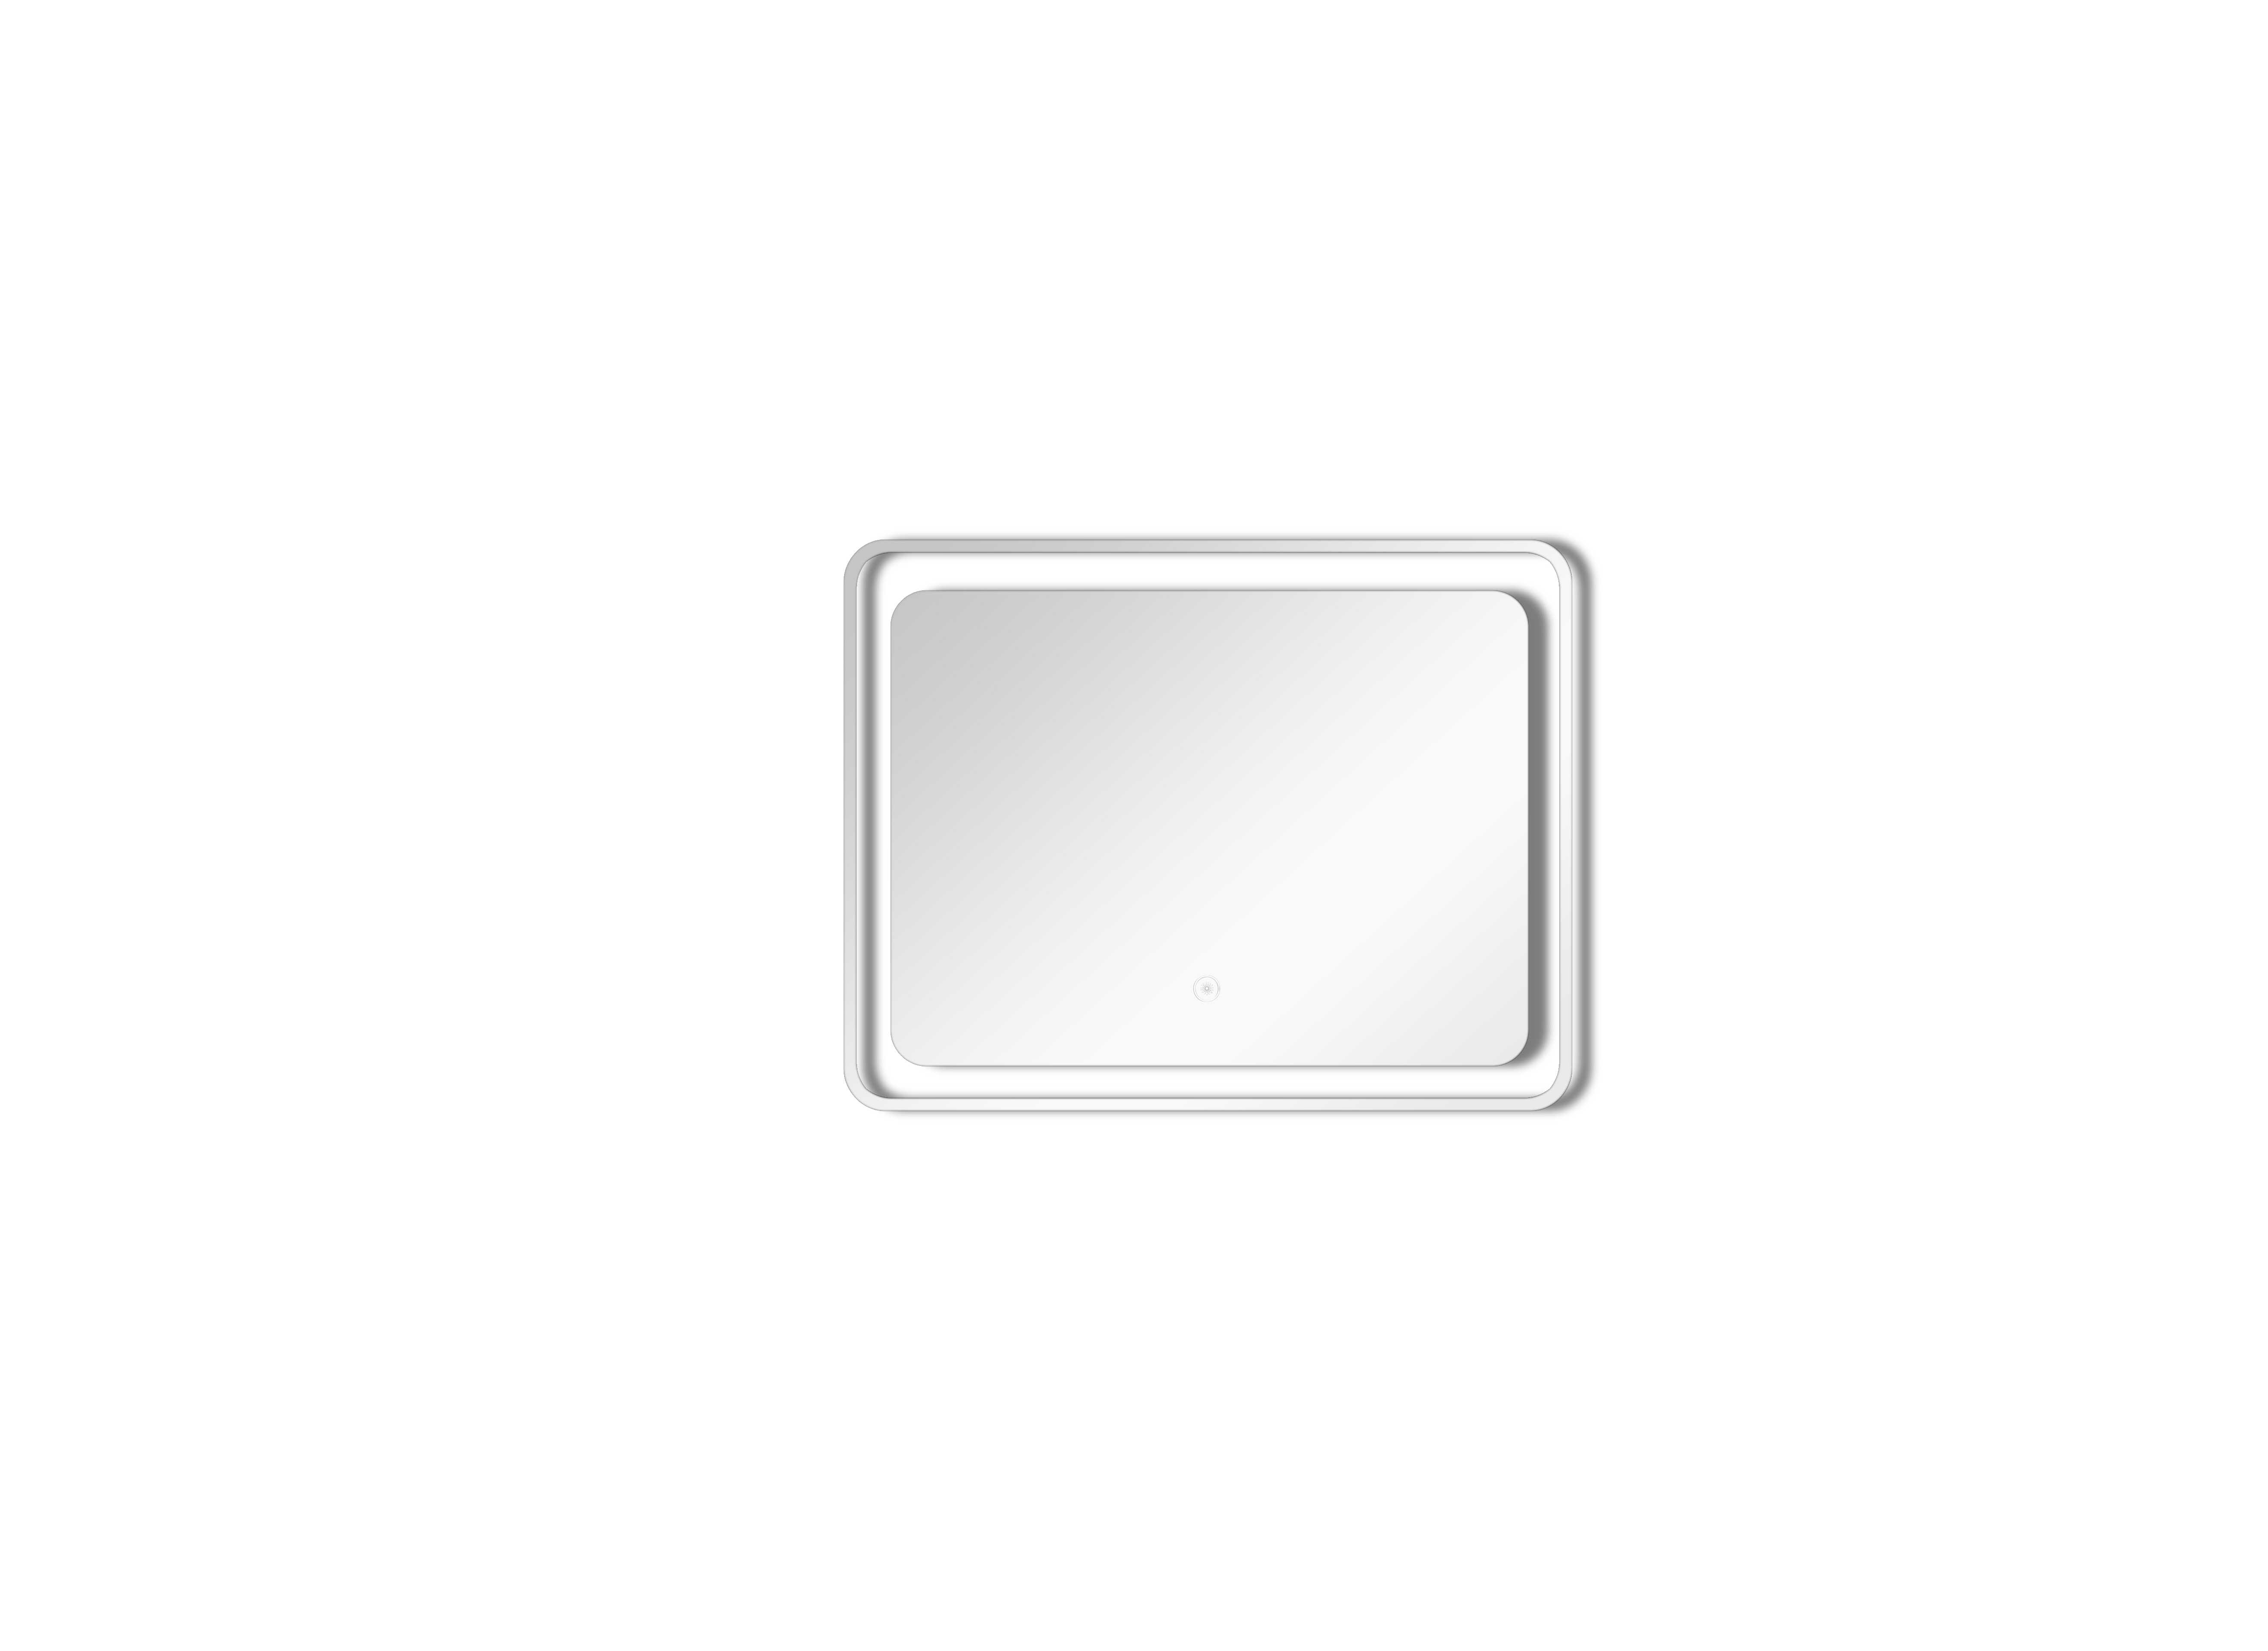 LED-Backlit Contemporary Mirror 23.62x19.69" w/Touch Sensor